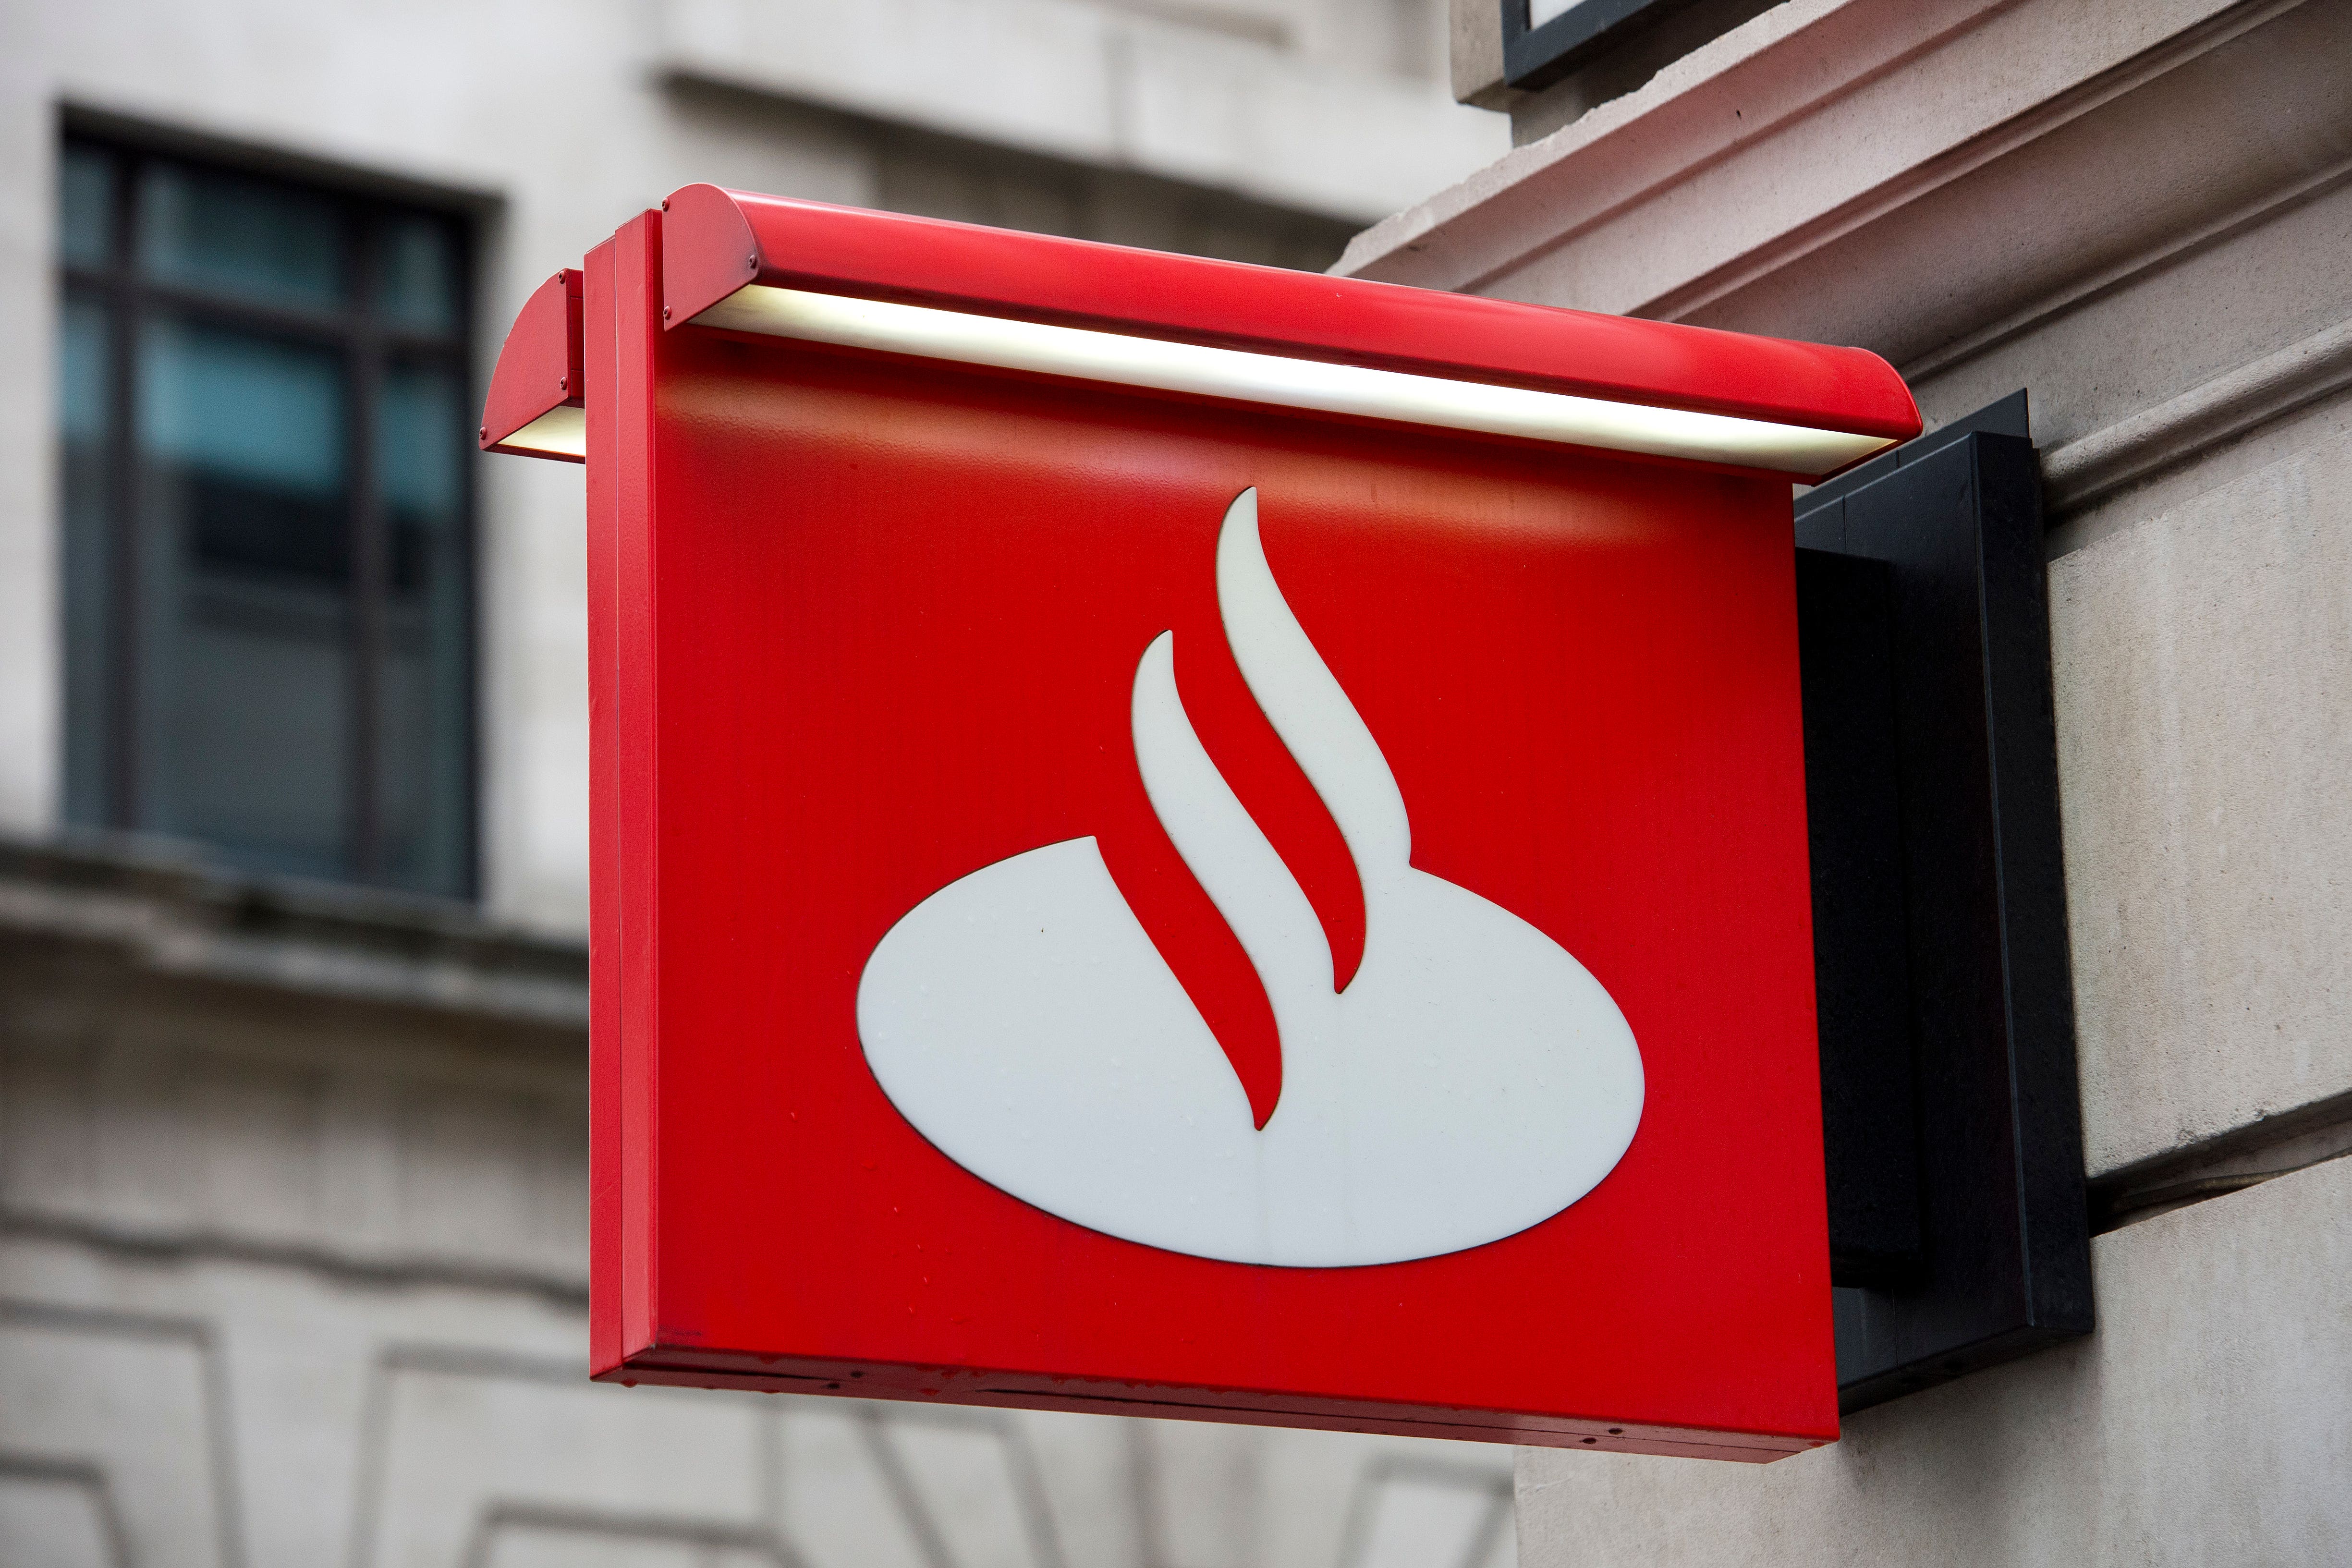 Santander became the latest major mortgage lender to announce a temporary pause on some mortgage applications